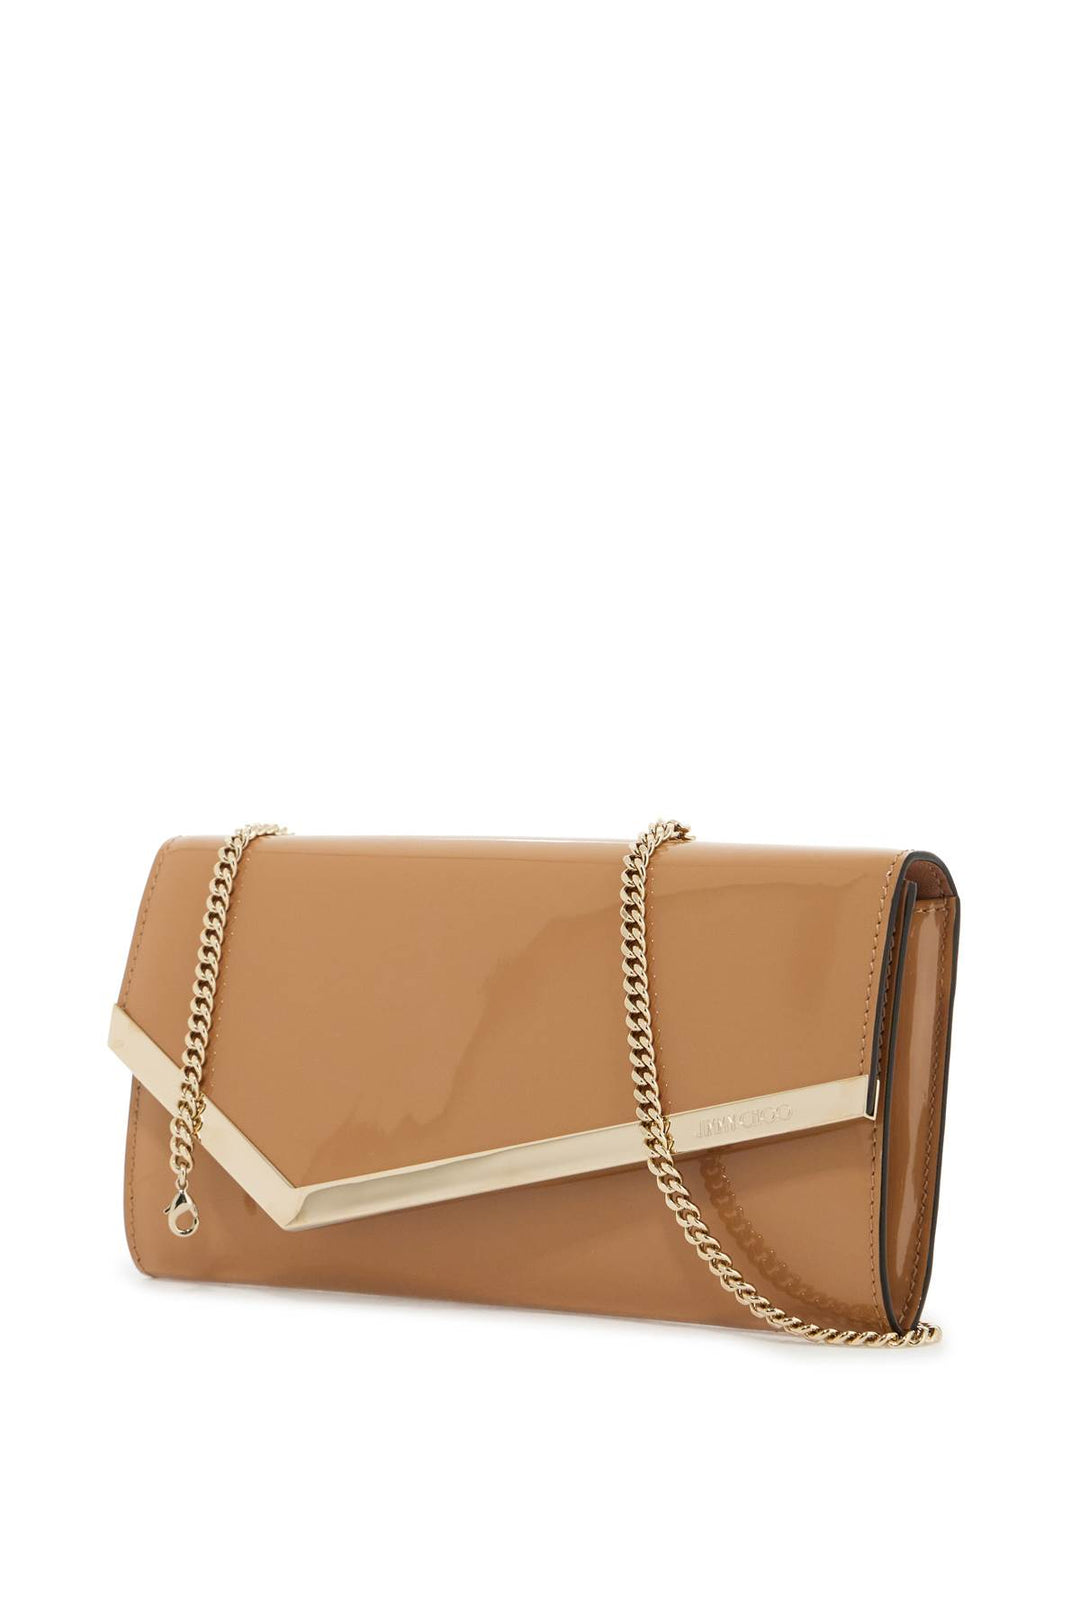 Jimmy Choo Patent Leather Emmie Clutch   Brown